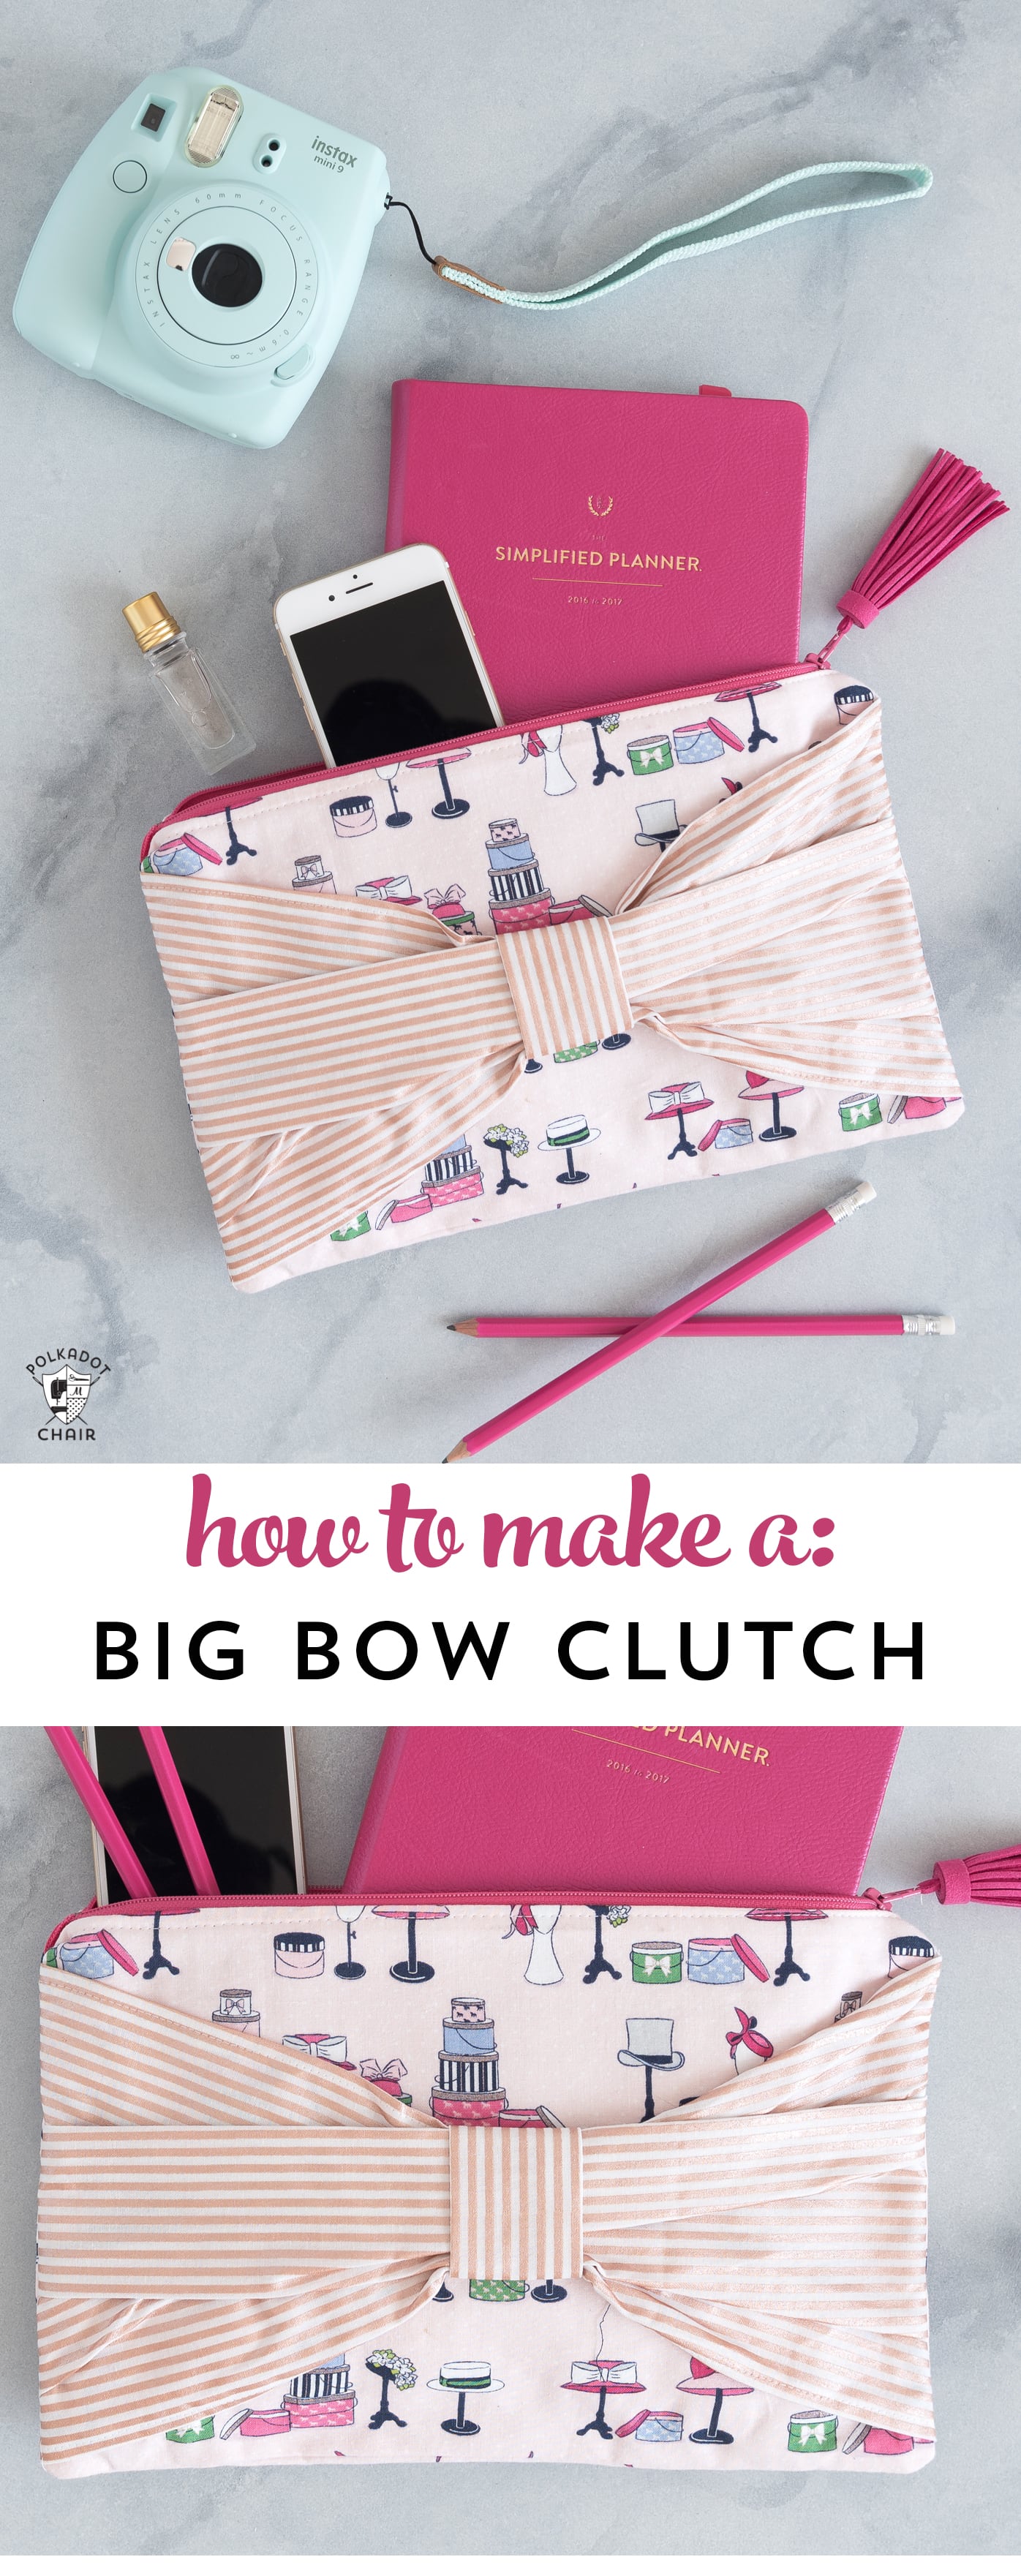 How to Sew an Envelope Clutch Bag | Hobbycraft